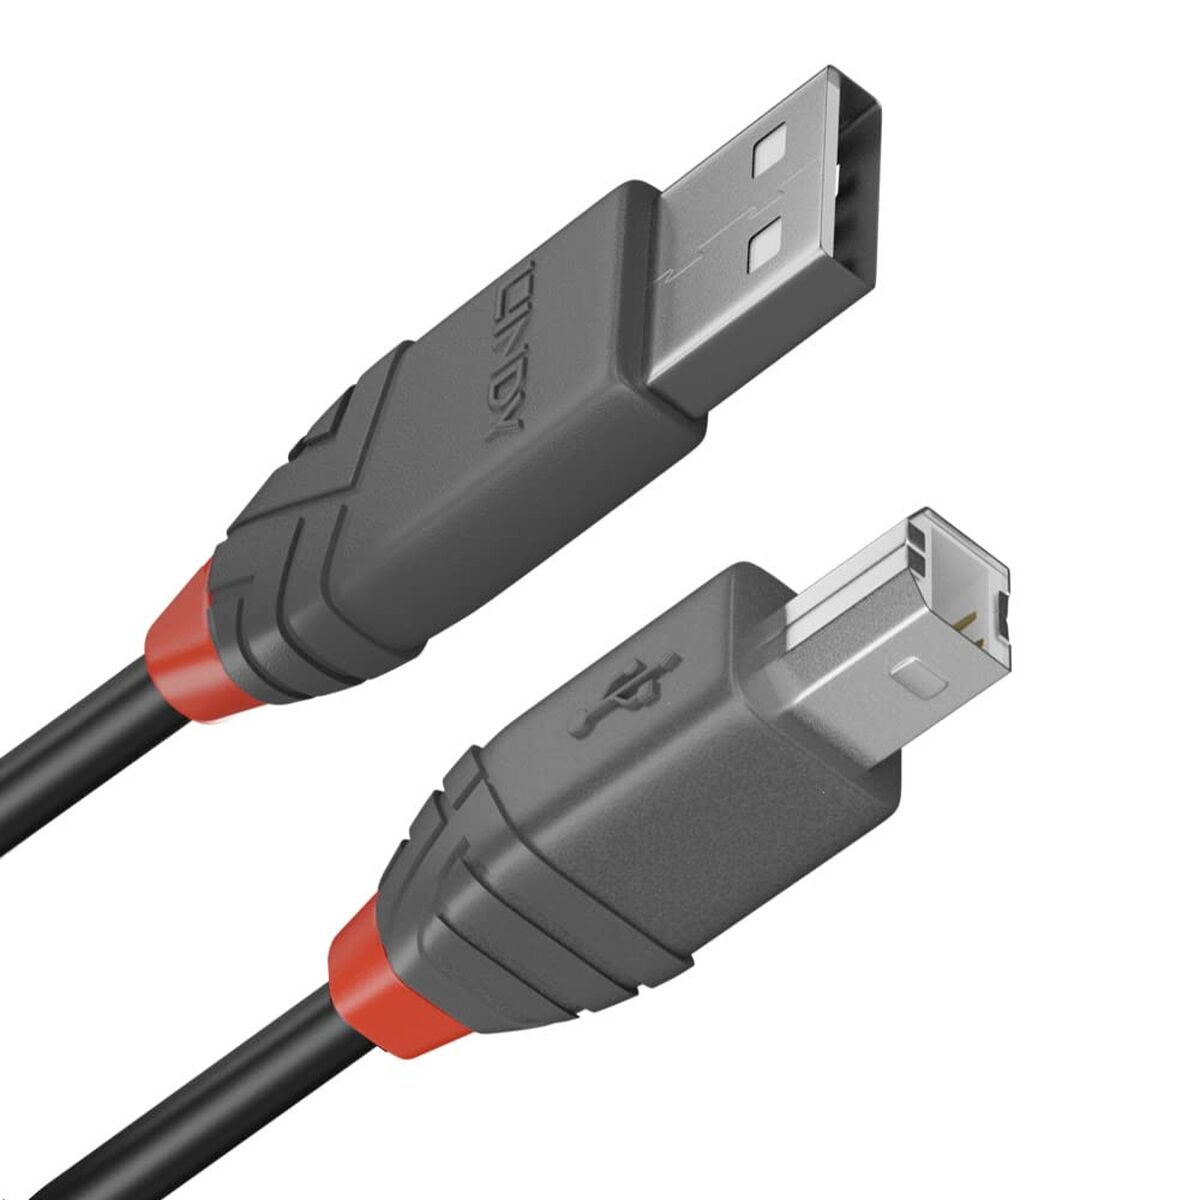 USB A to USB B Cable LINDY 36670 20 cm Black